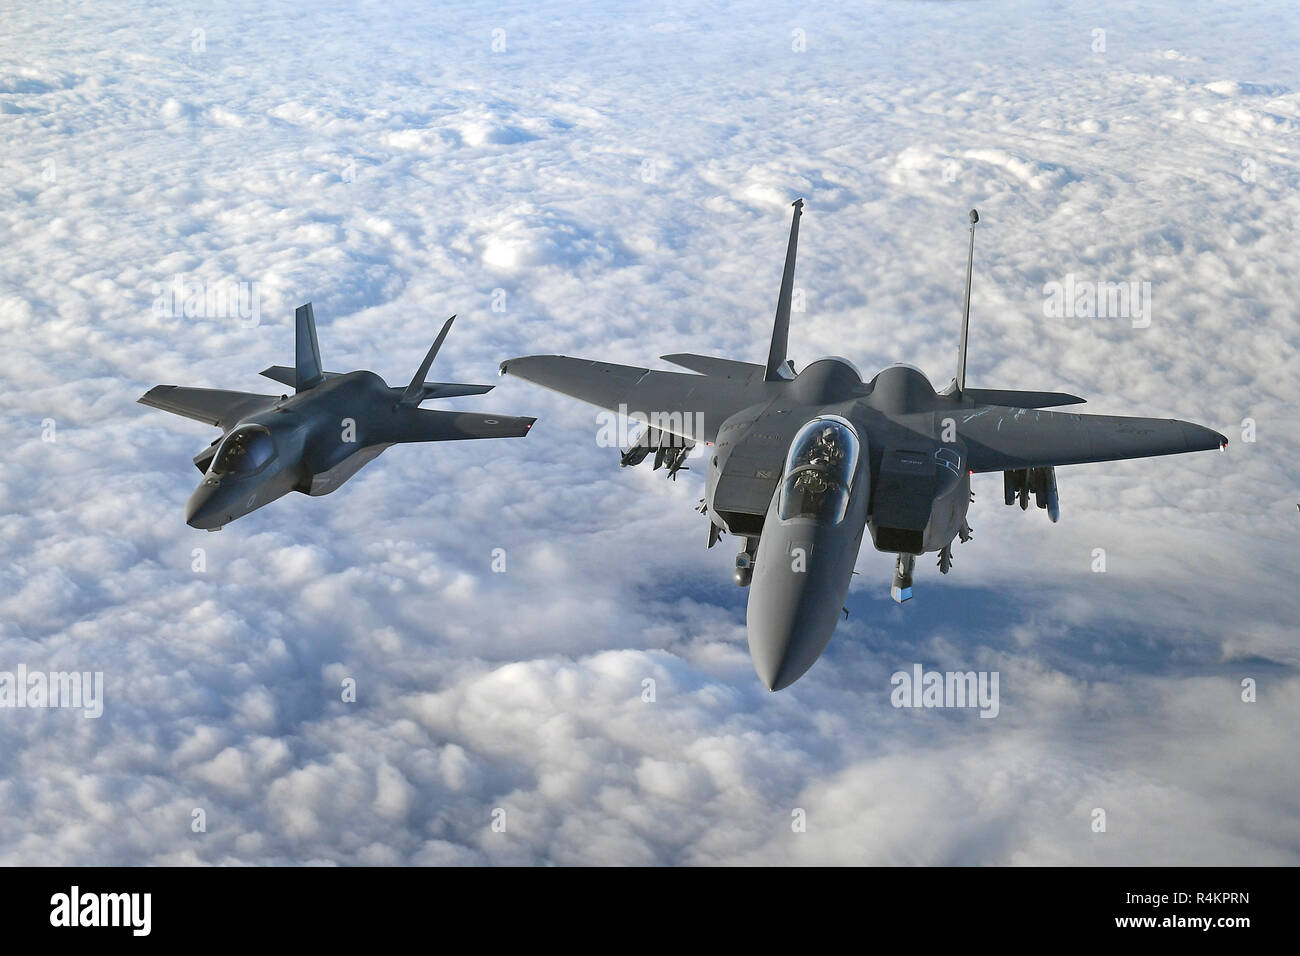 An RAF F-35B Lightning stealth jet (left) flies with a United States Air Force F-15 Strike Eagle over the English Channel during Operation Point Blank, which featured aerial capabilities from the RAF, United States Air Force and French Air Force. Stock Photo